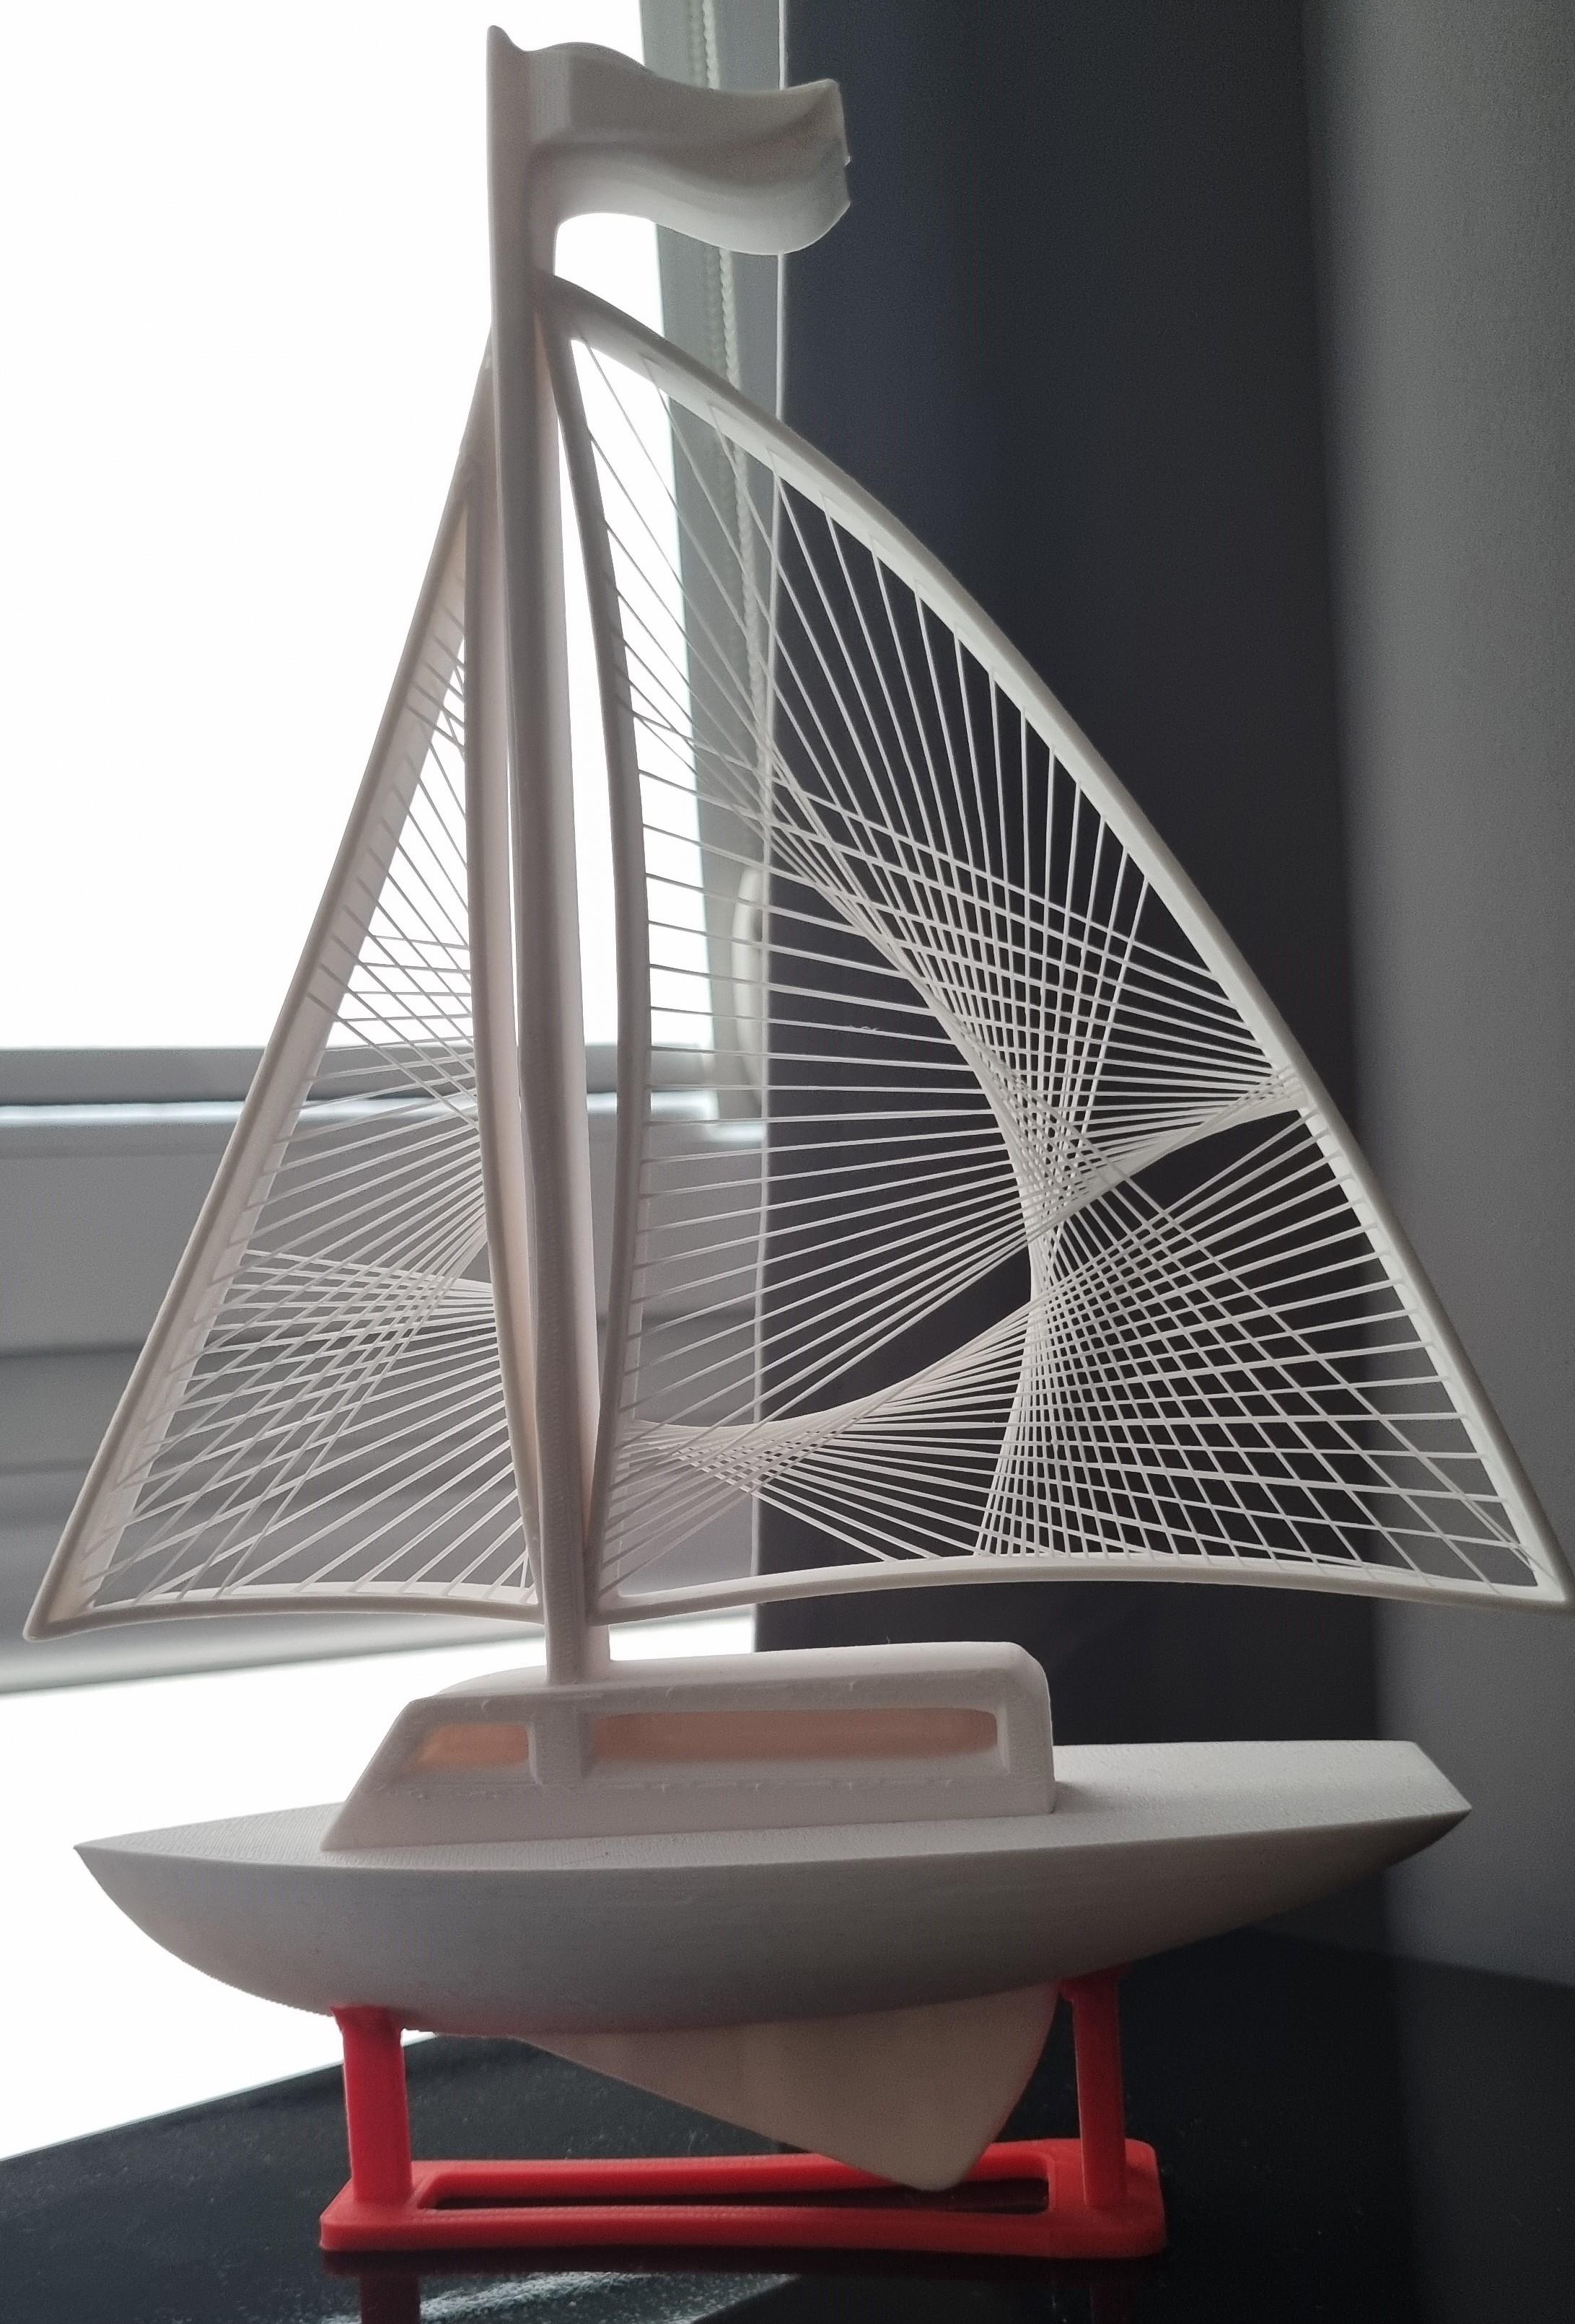 A solid stand for Sailboat 3d model